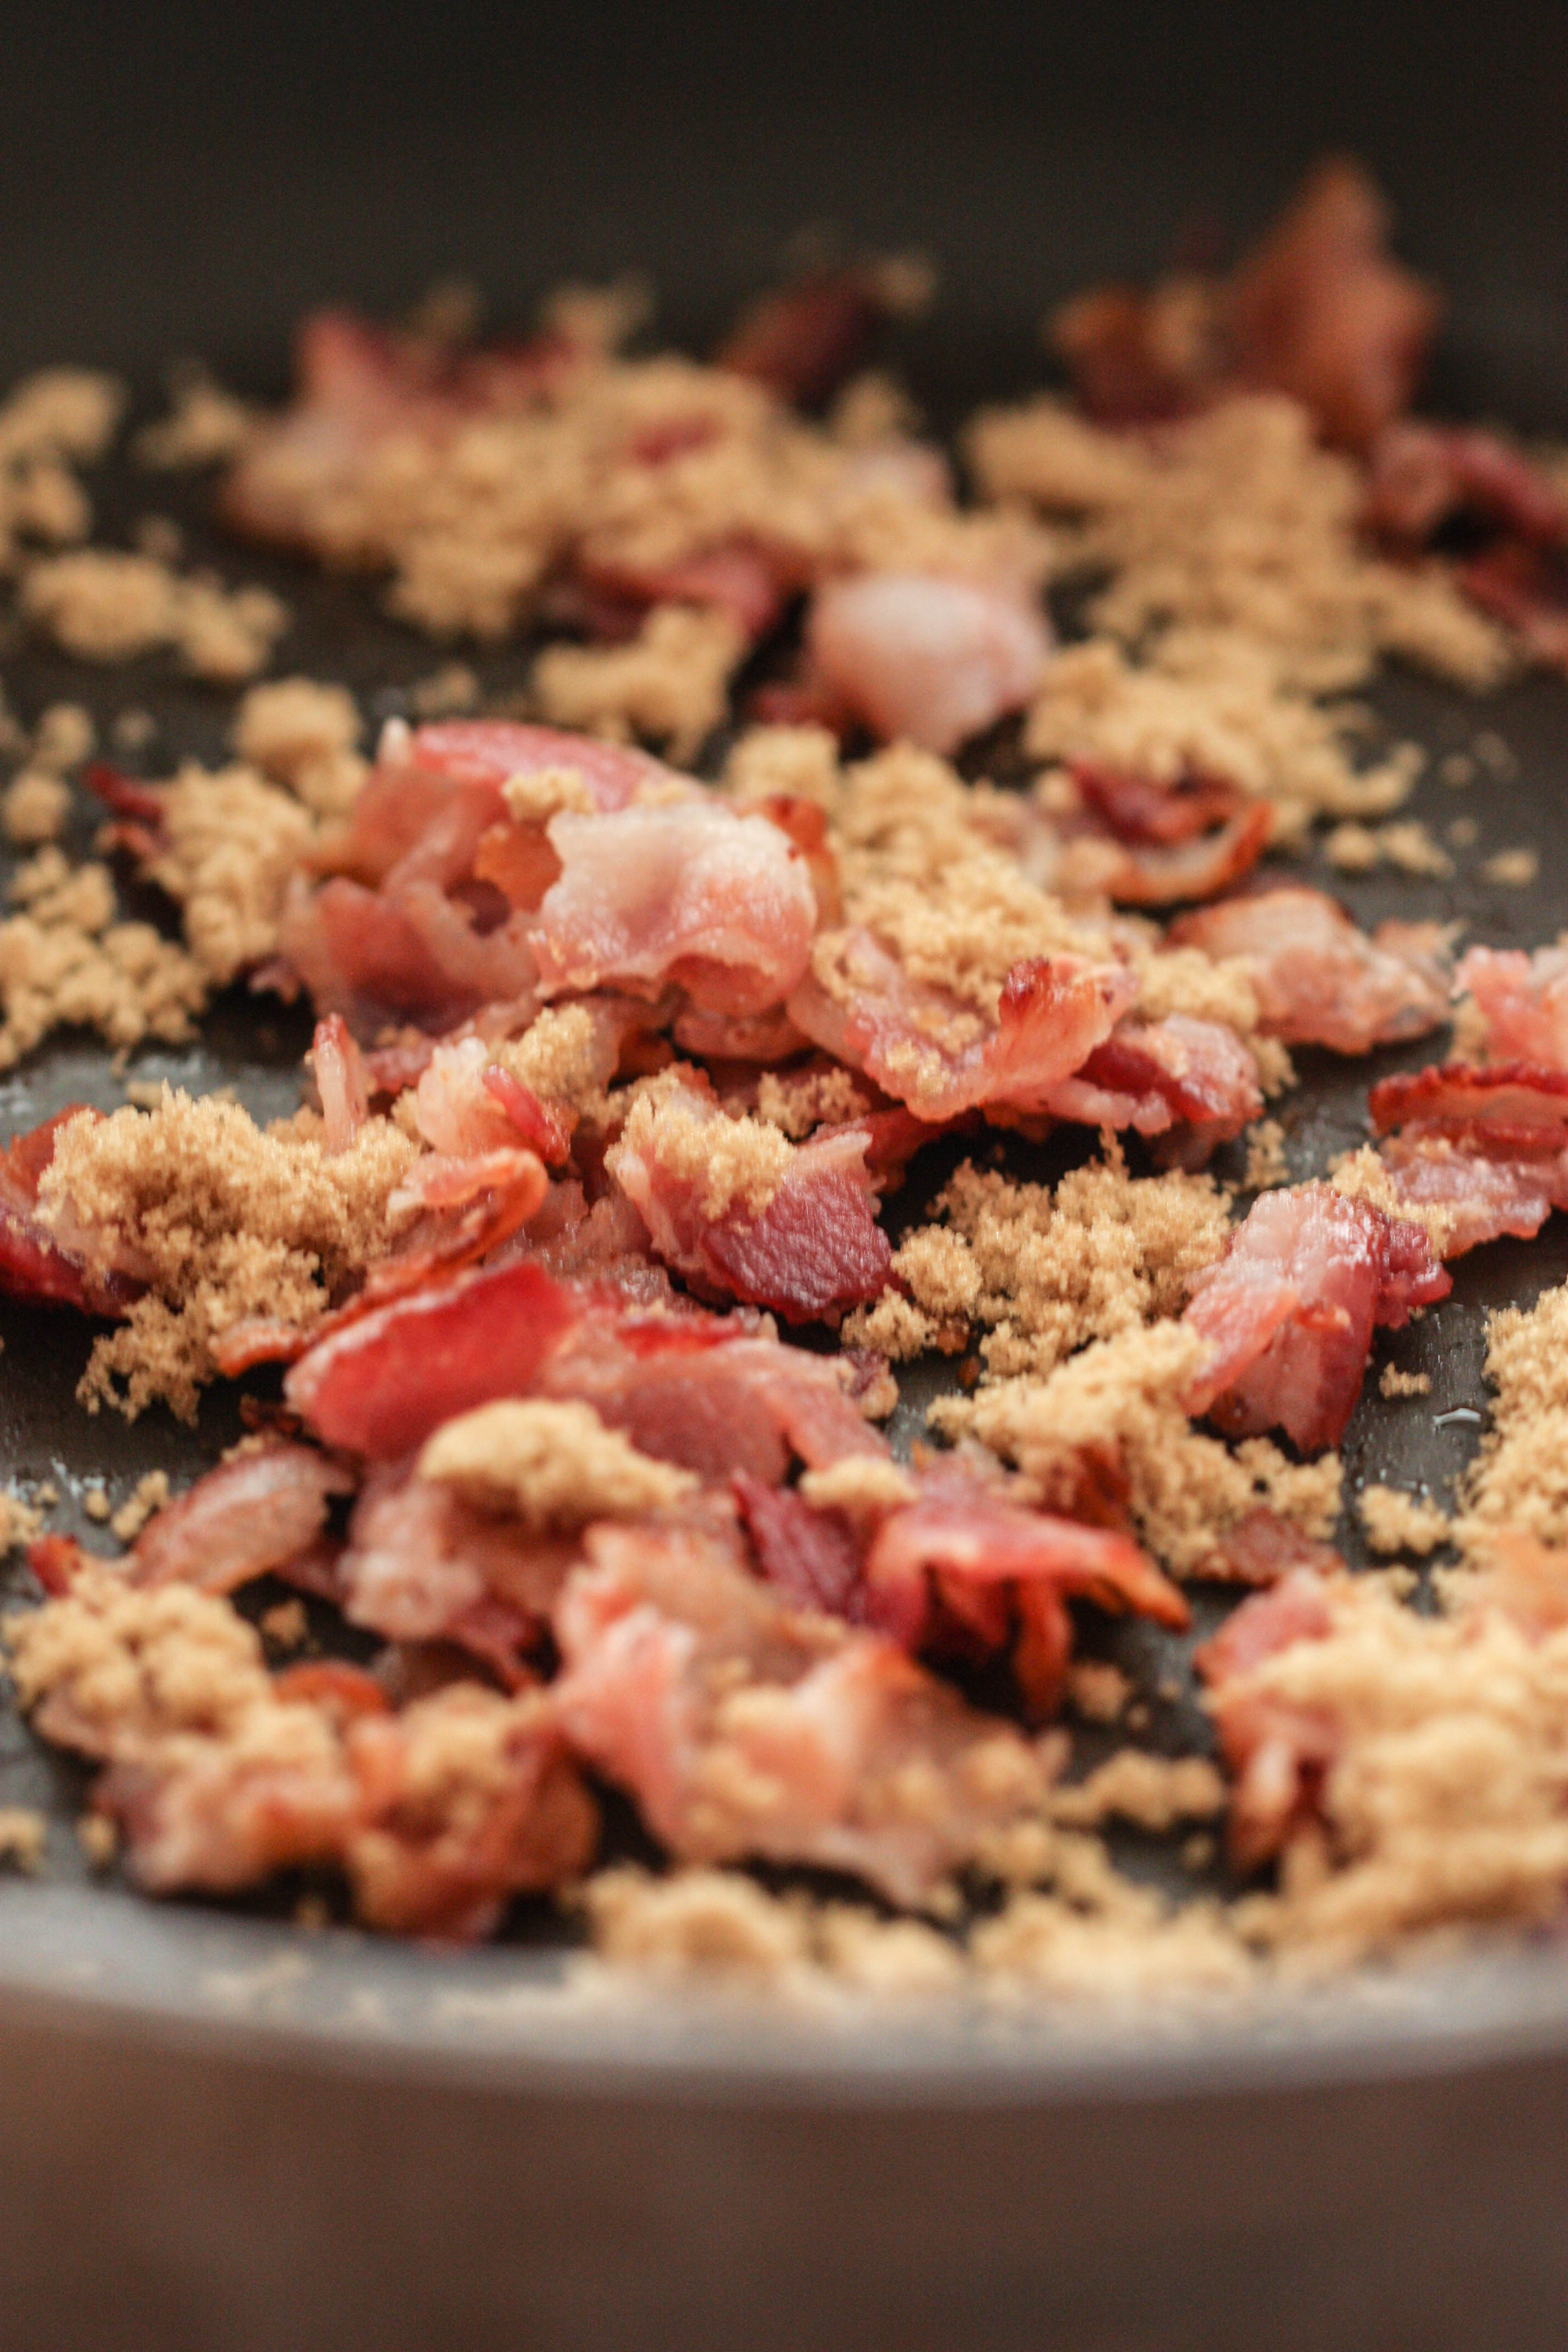 Crumbled Bacon and brown sugar in a pan